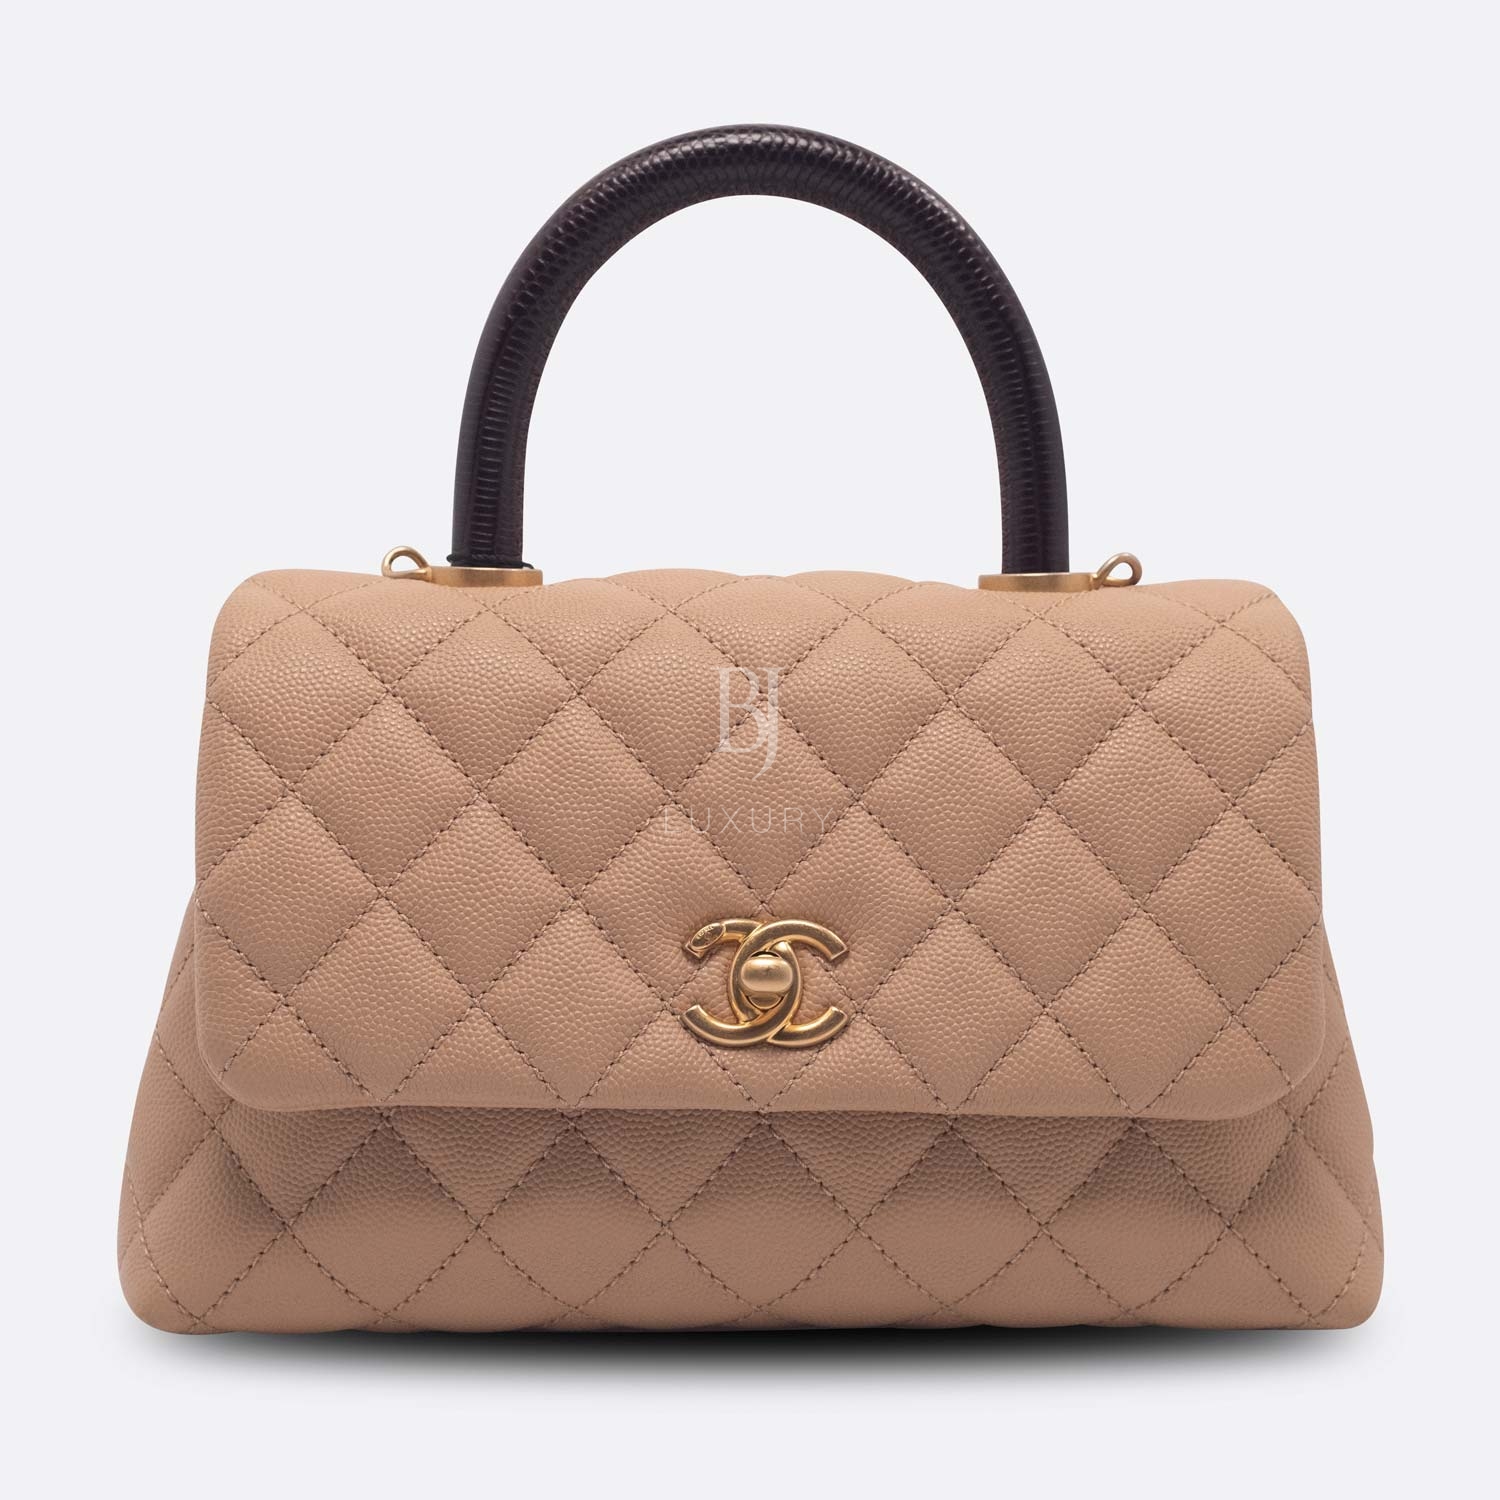 CHANEL-COCOHANDLE-SMALL-BEIGE-CAVIAR-4962-Front.jpg